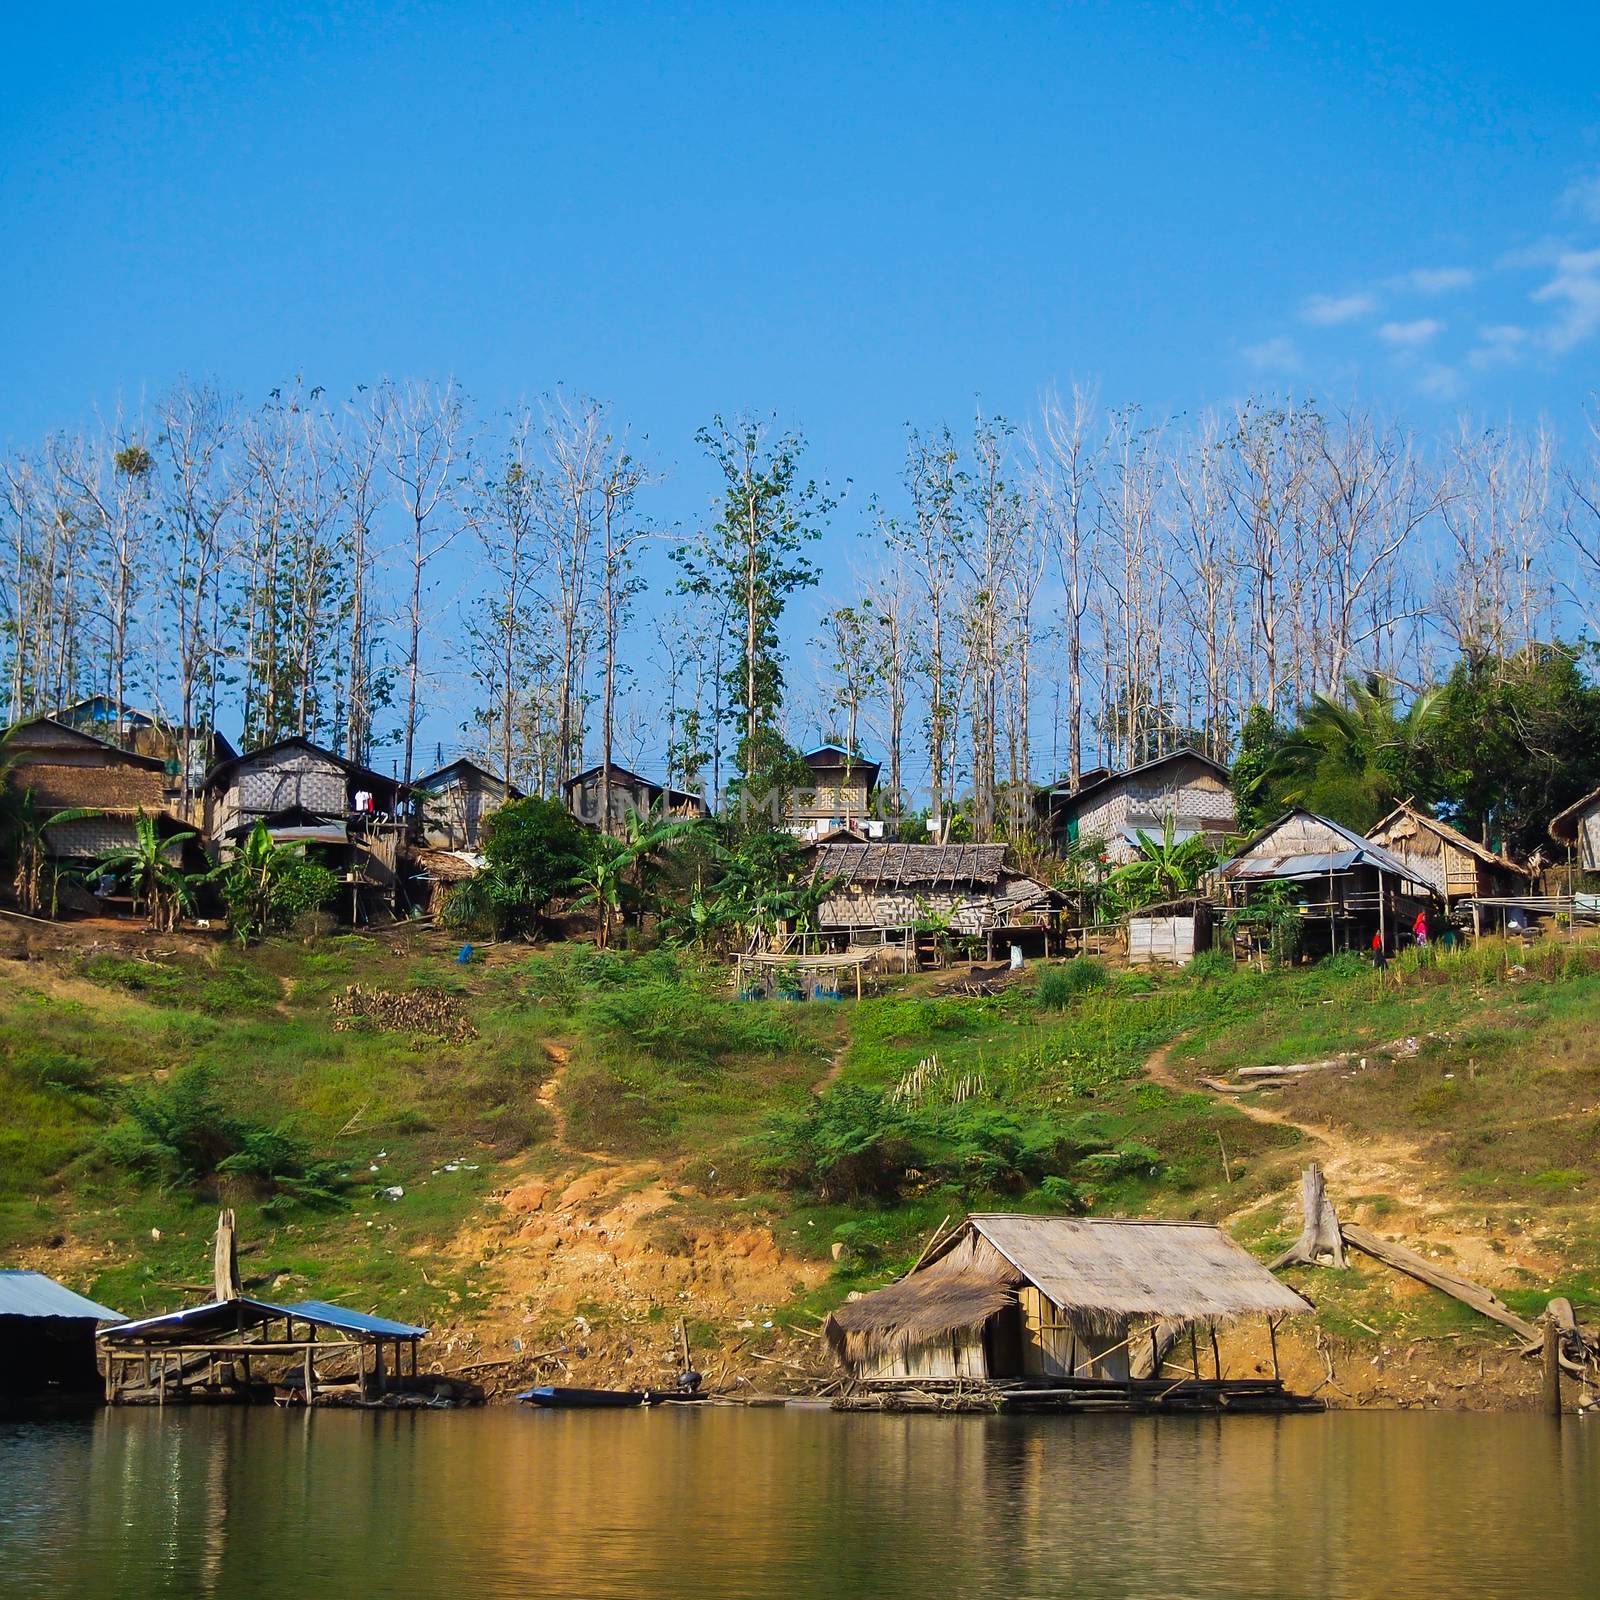 Floating houses by Songalia river in a folk villege by simpleBE